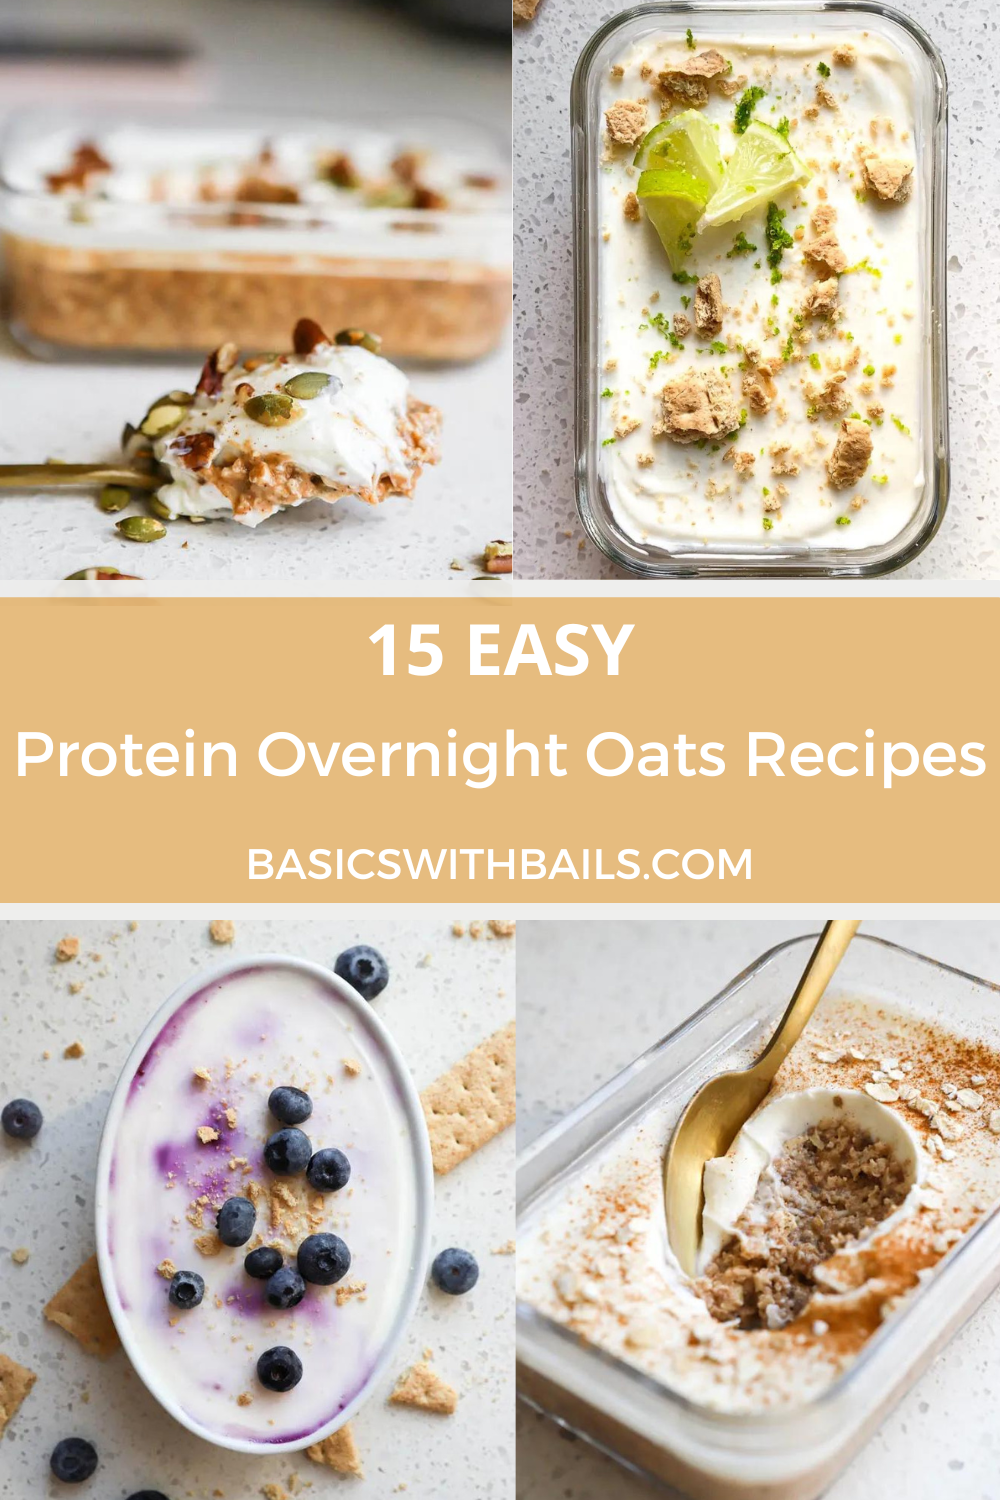 https://basicswithbails.com/wp-content/uploads/2022/11/easy-protein-overnight-oats-recipes.png